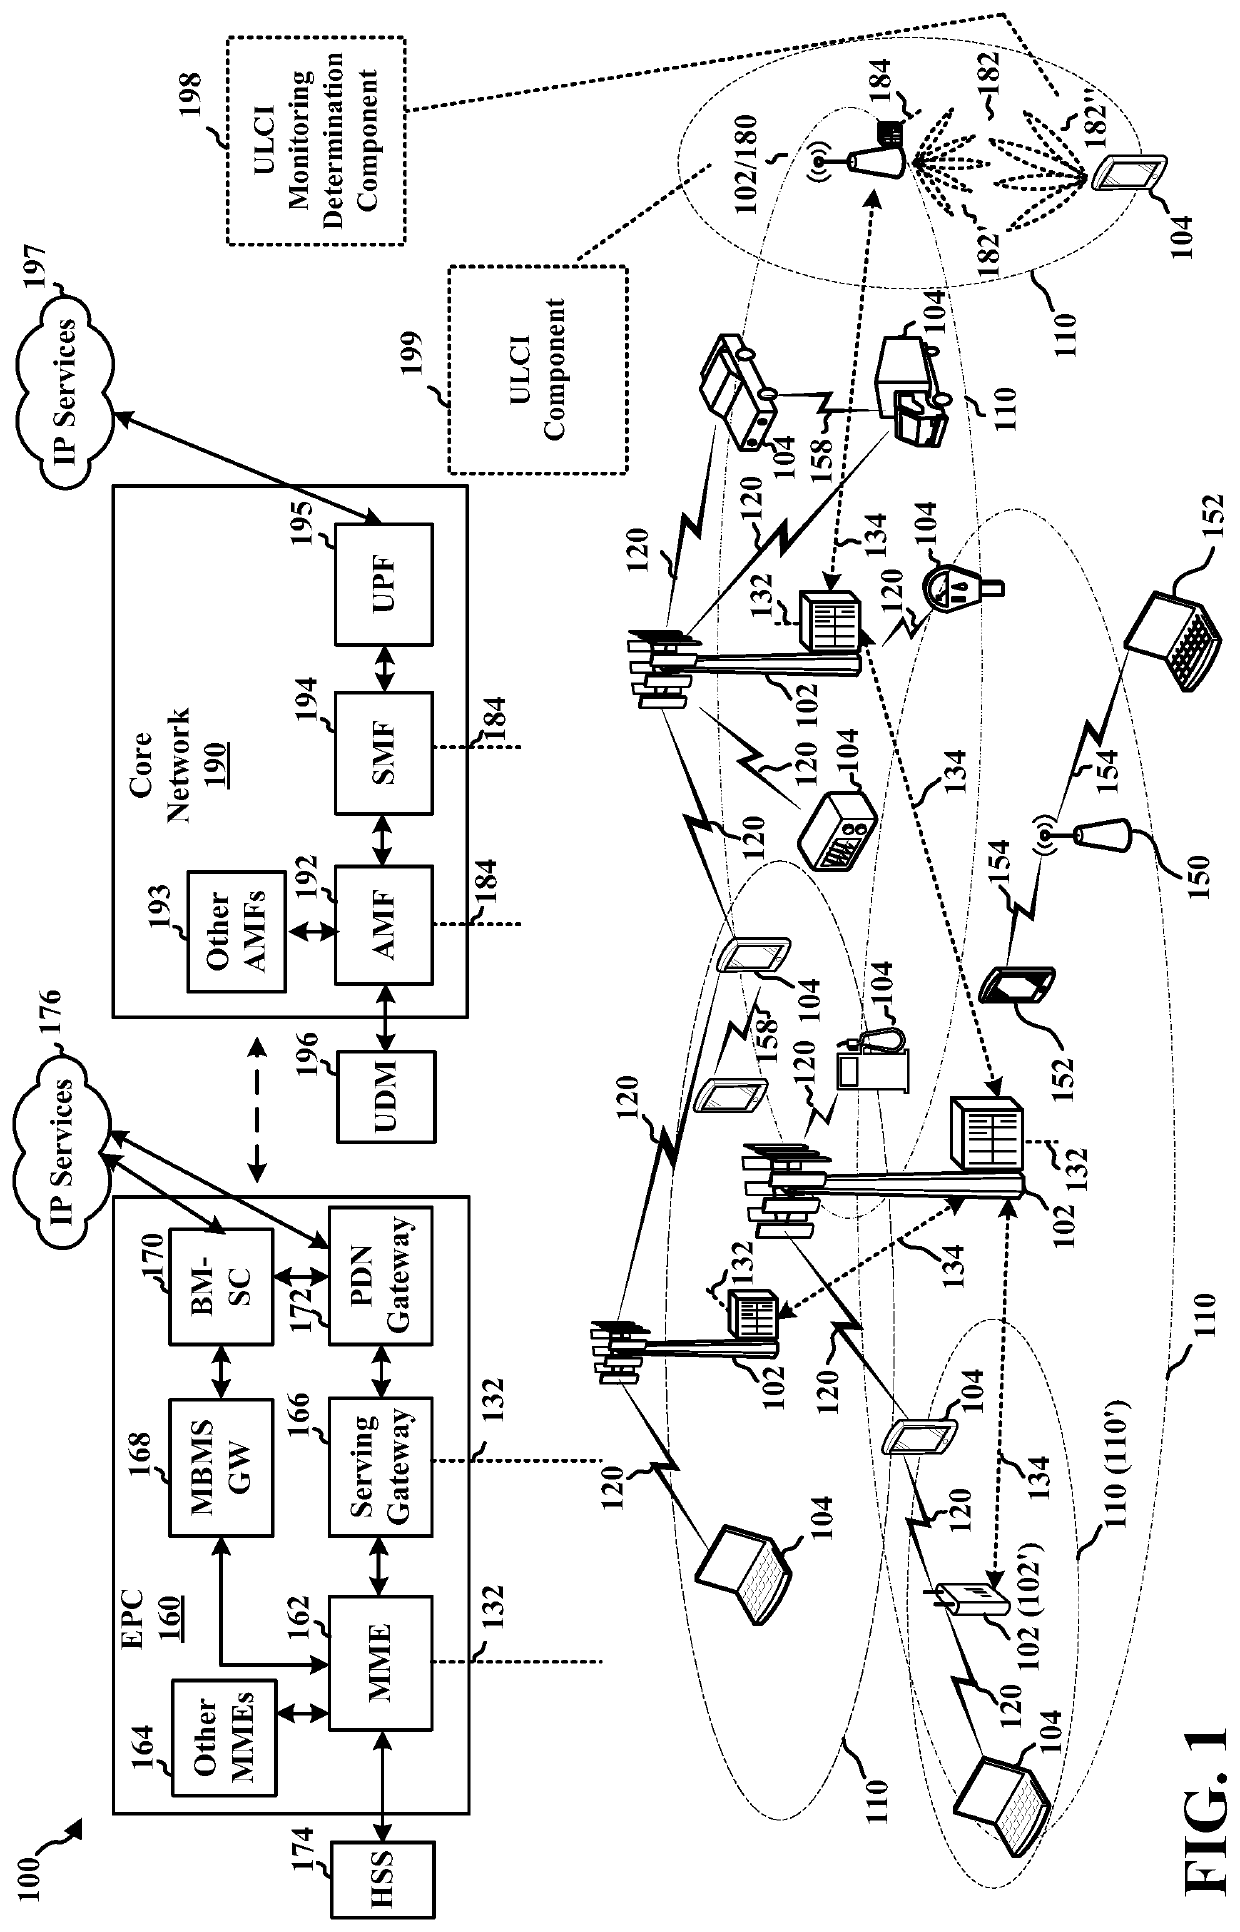 Methods and apparatus to selectively monitor uplink preemptive indication for supplementary uplink and non-supplementary uplink carriers